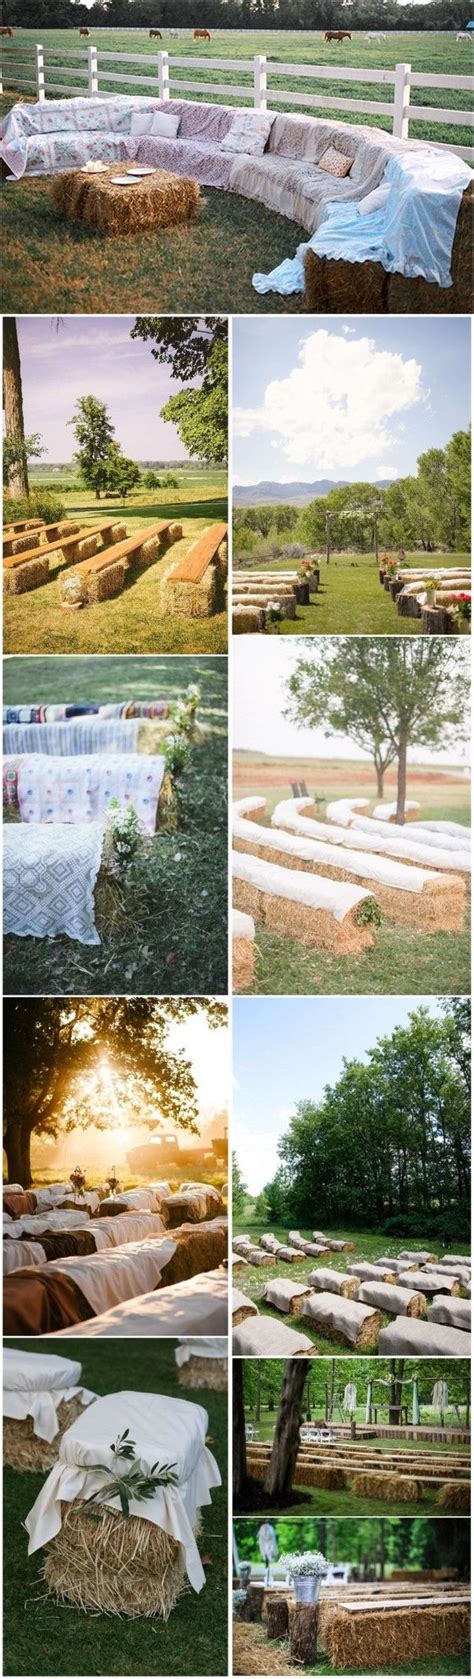 Many Different Pictures Of Hay Bales And Trees